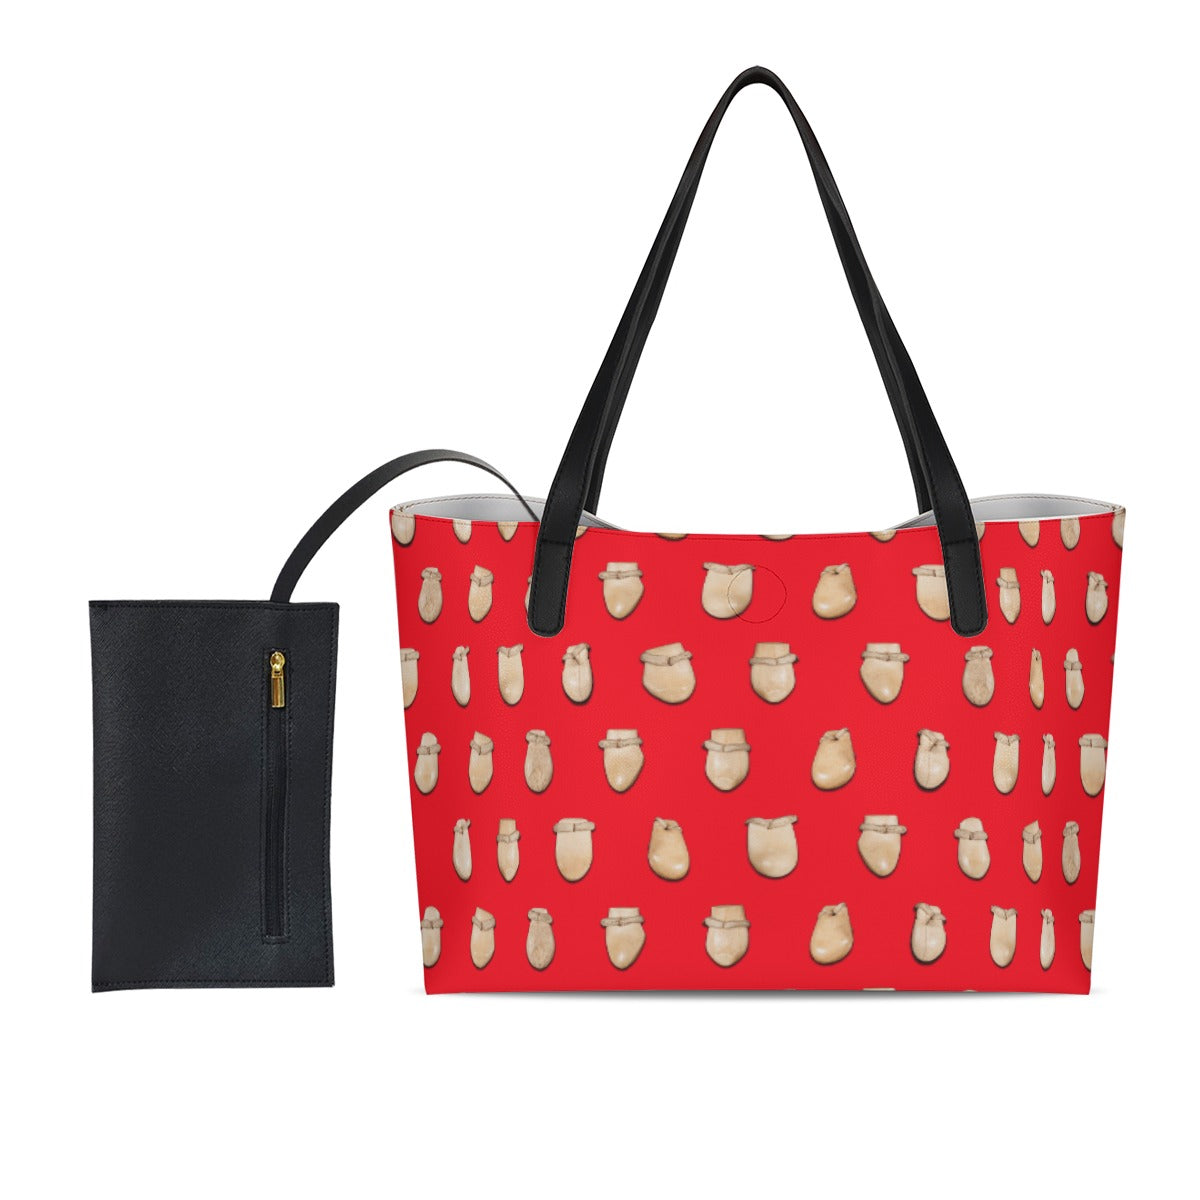 Elk Teeth on Red Shopping Tote Bag With Black Mini Purse